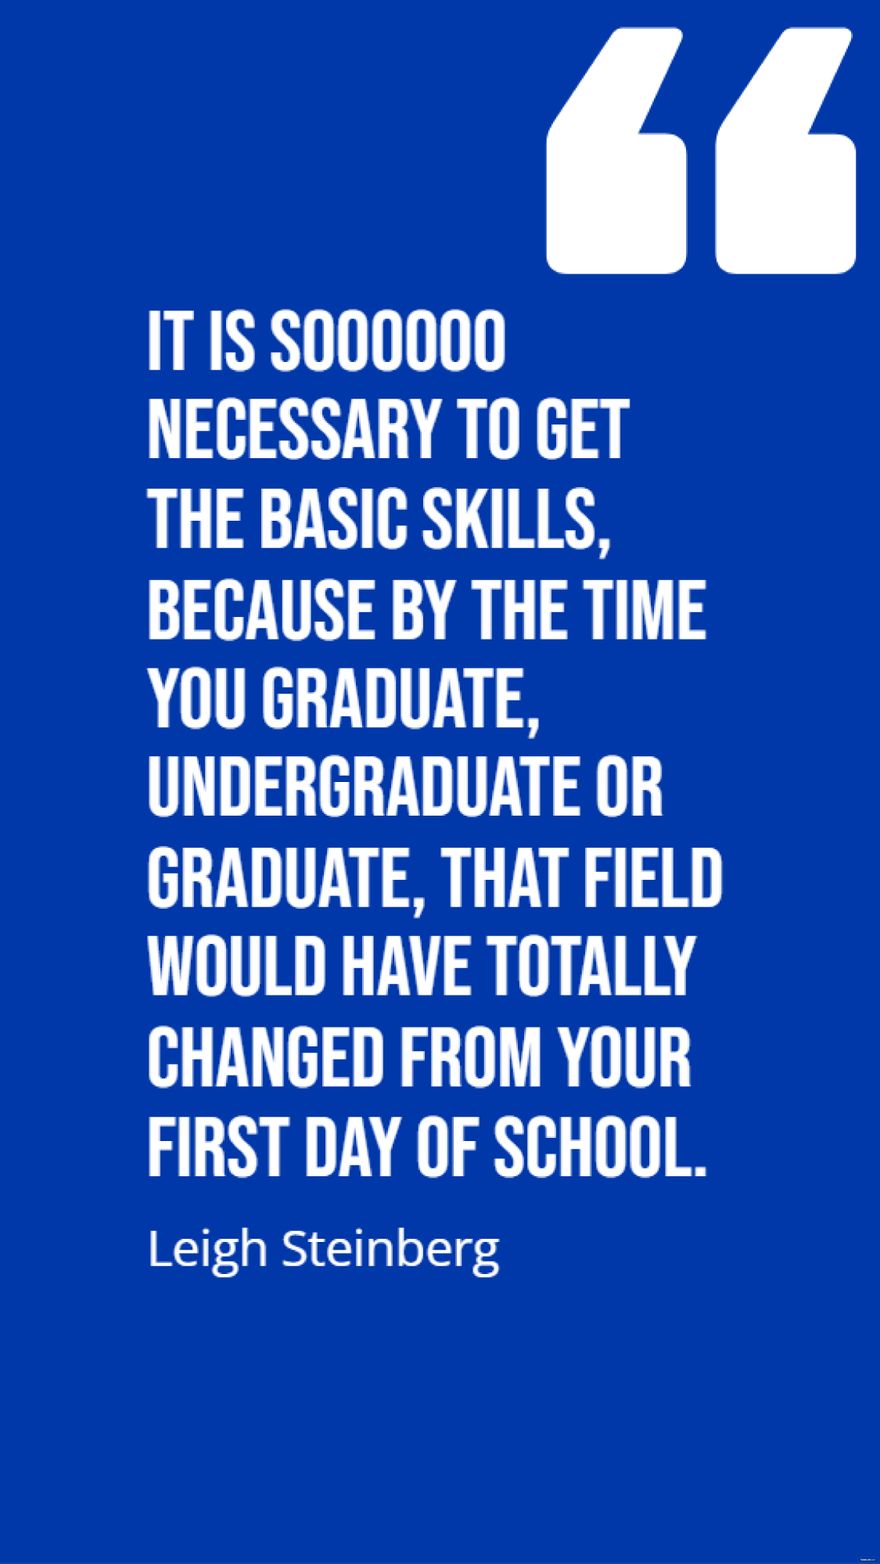 Leigh Steinberg - It is soooooo necessary to get the basic skills, because by the time you graduate, undergraduate or graduate, that field would have totally changed from your first day of school. Tem